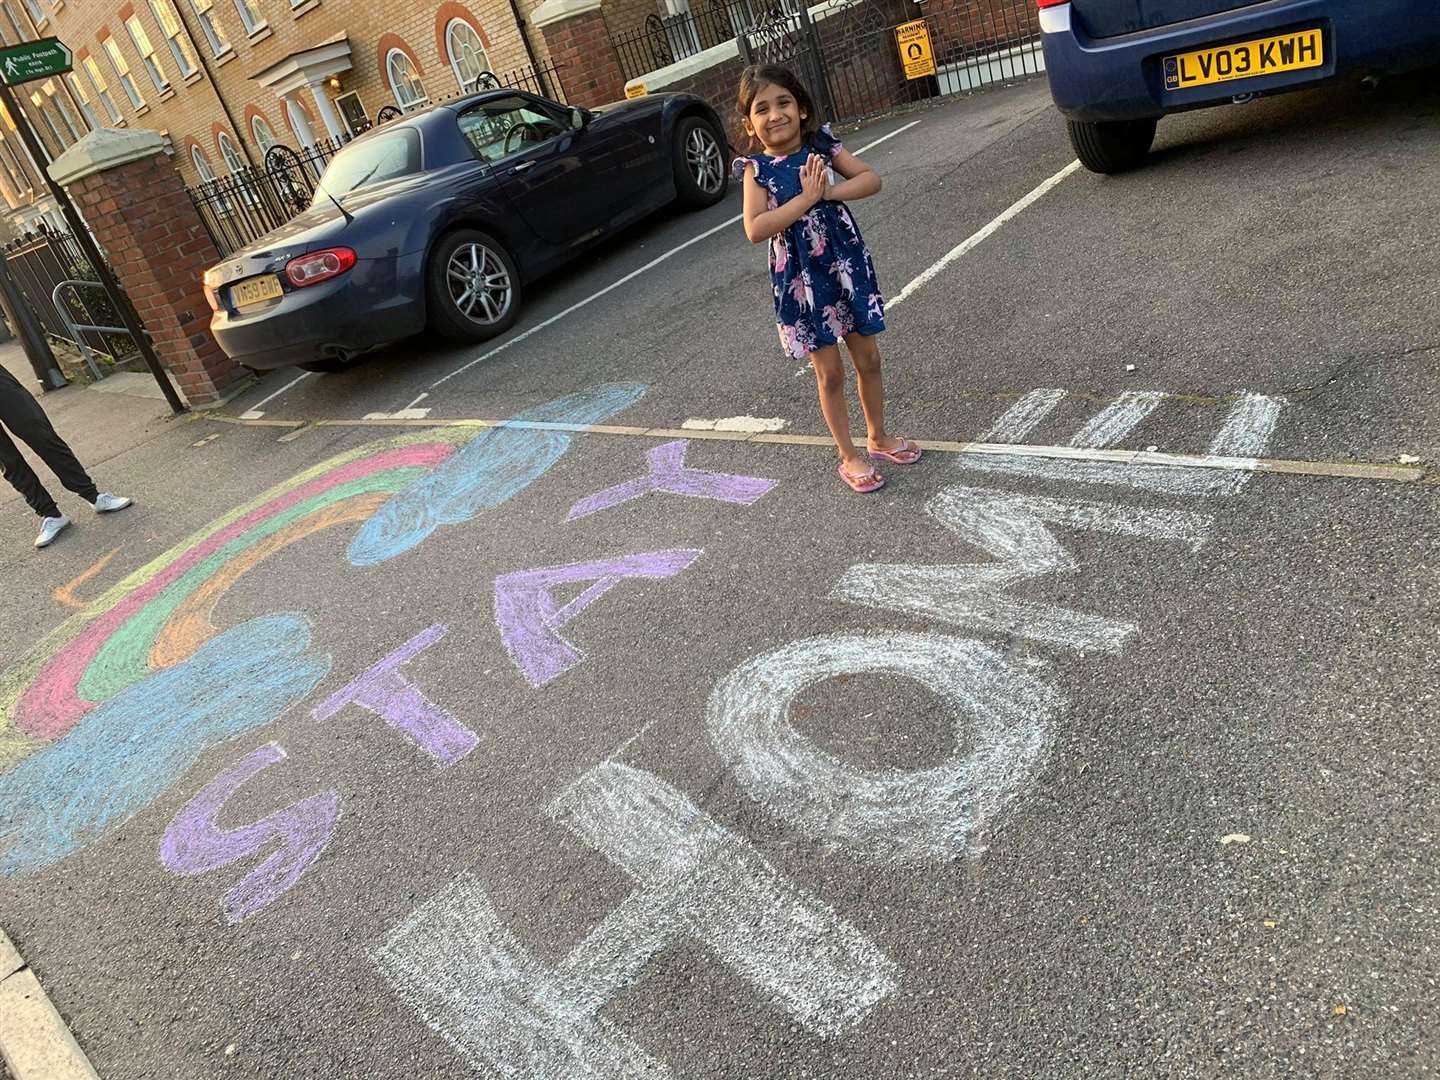 The primary pupil etched a friendly message to passer-bys